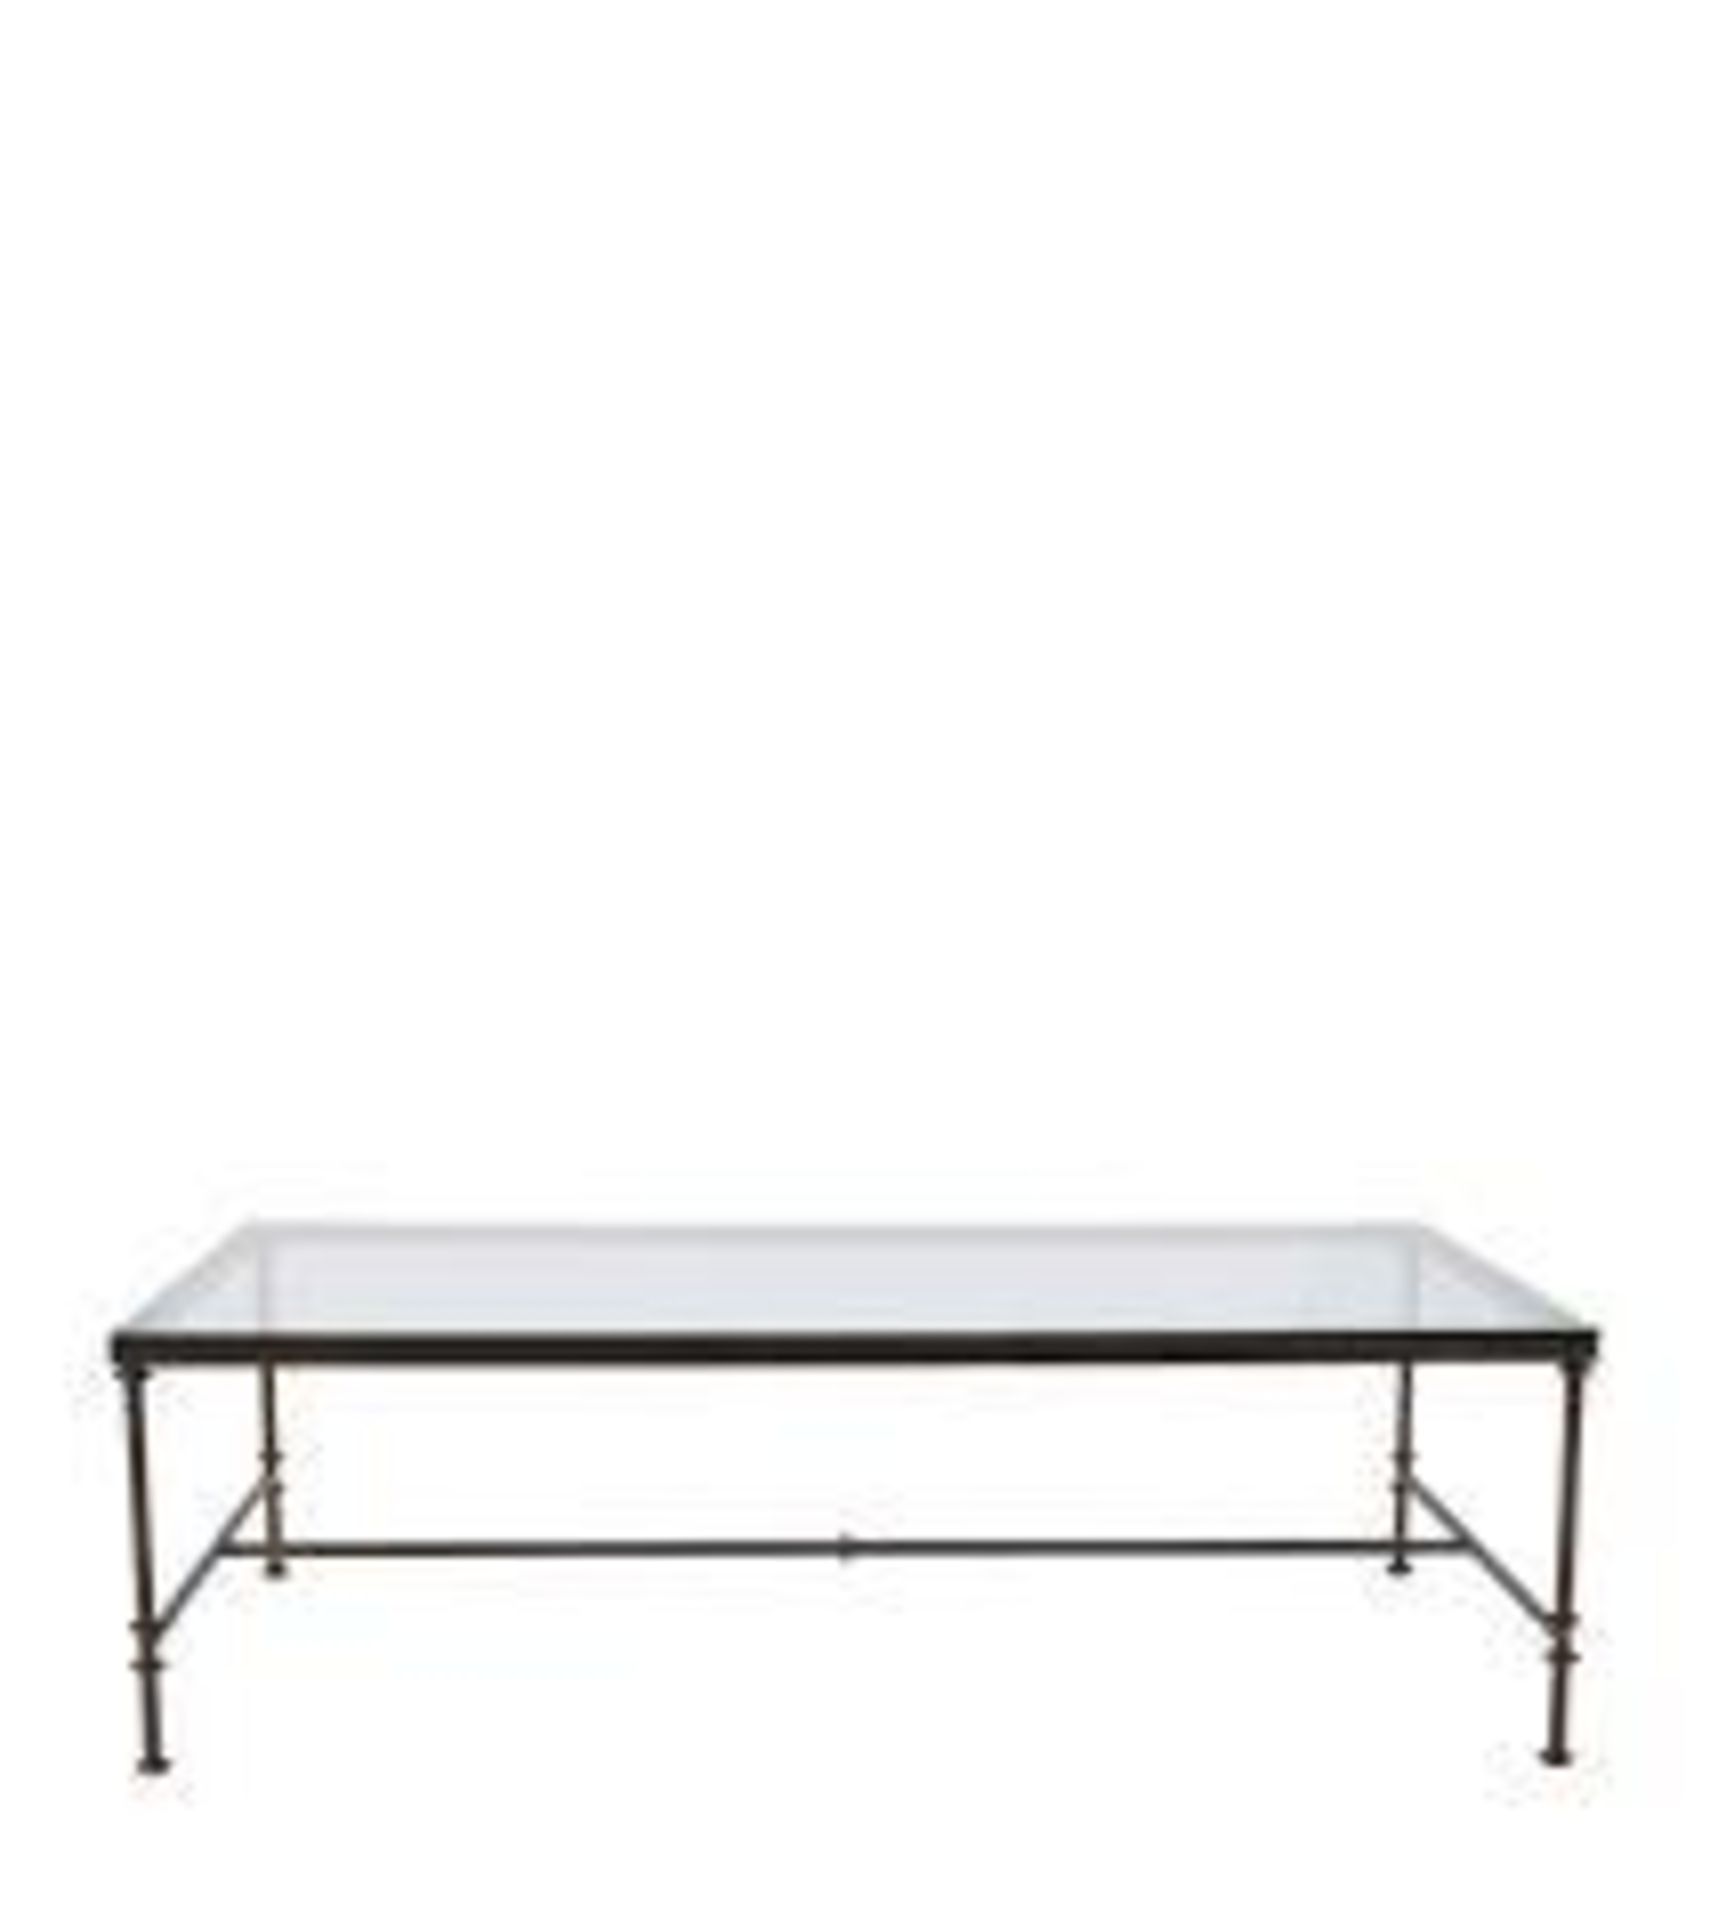 (Jb) RRP £150 Lot To Contain 1 Unpackaged Luxury Designer Glass Topped Coffee Table